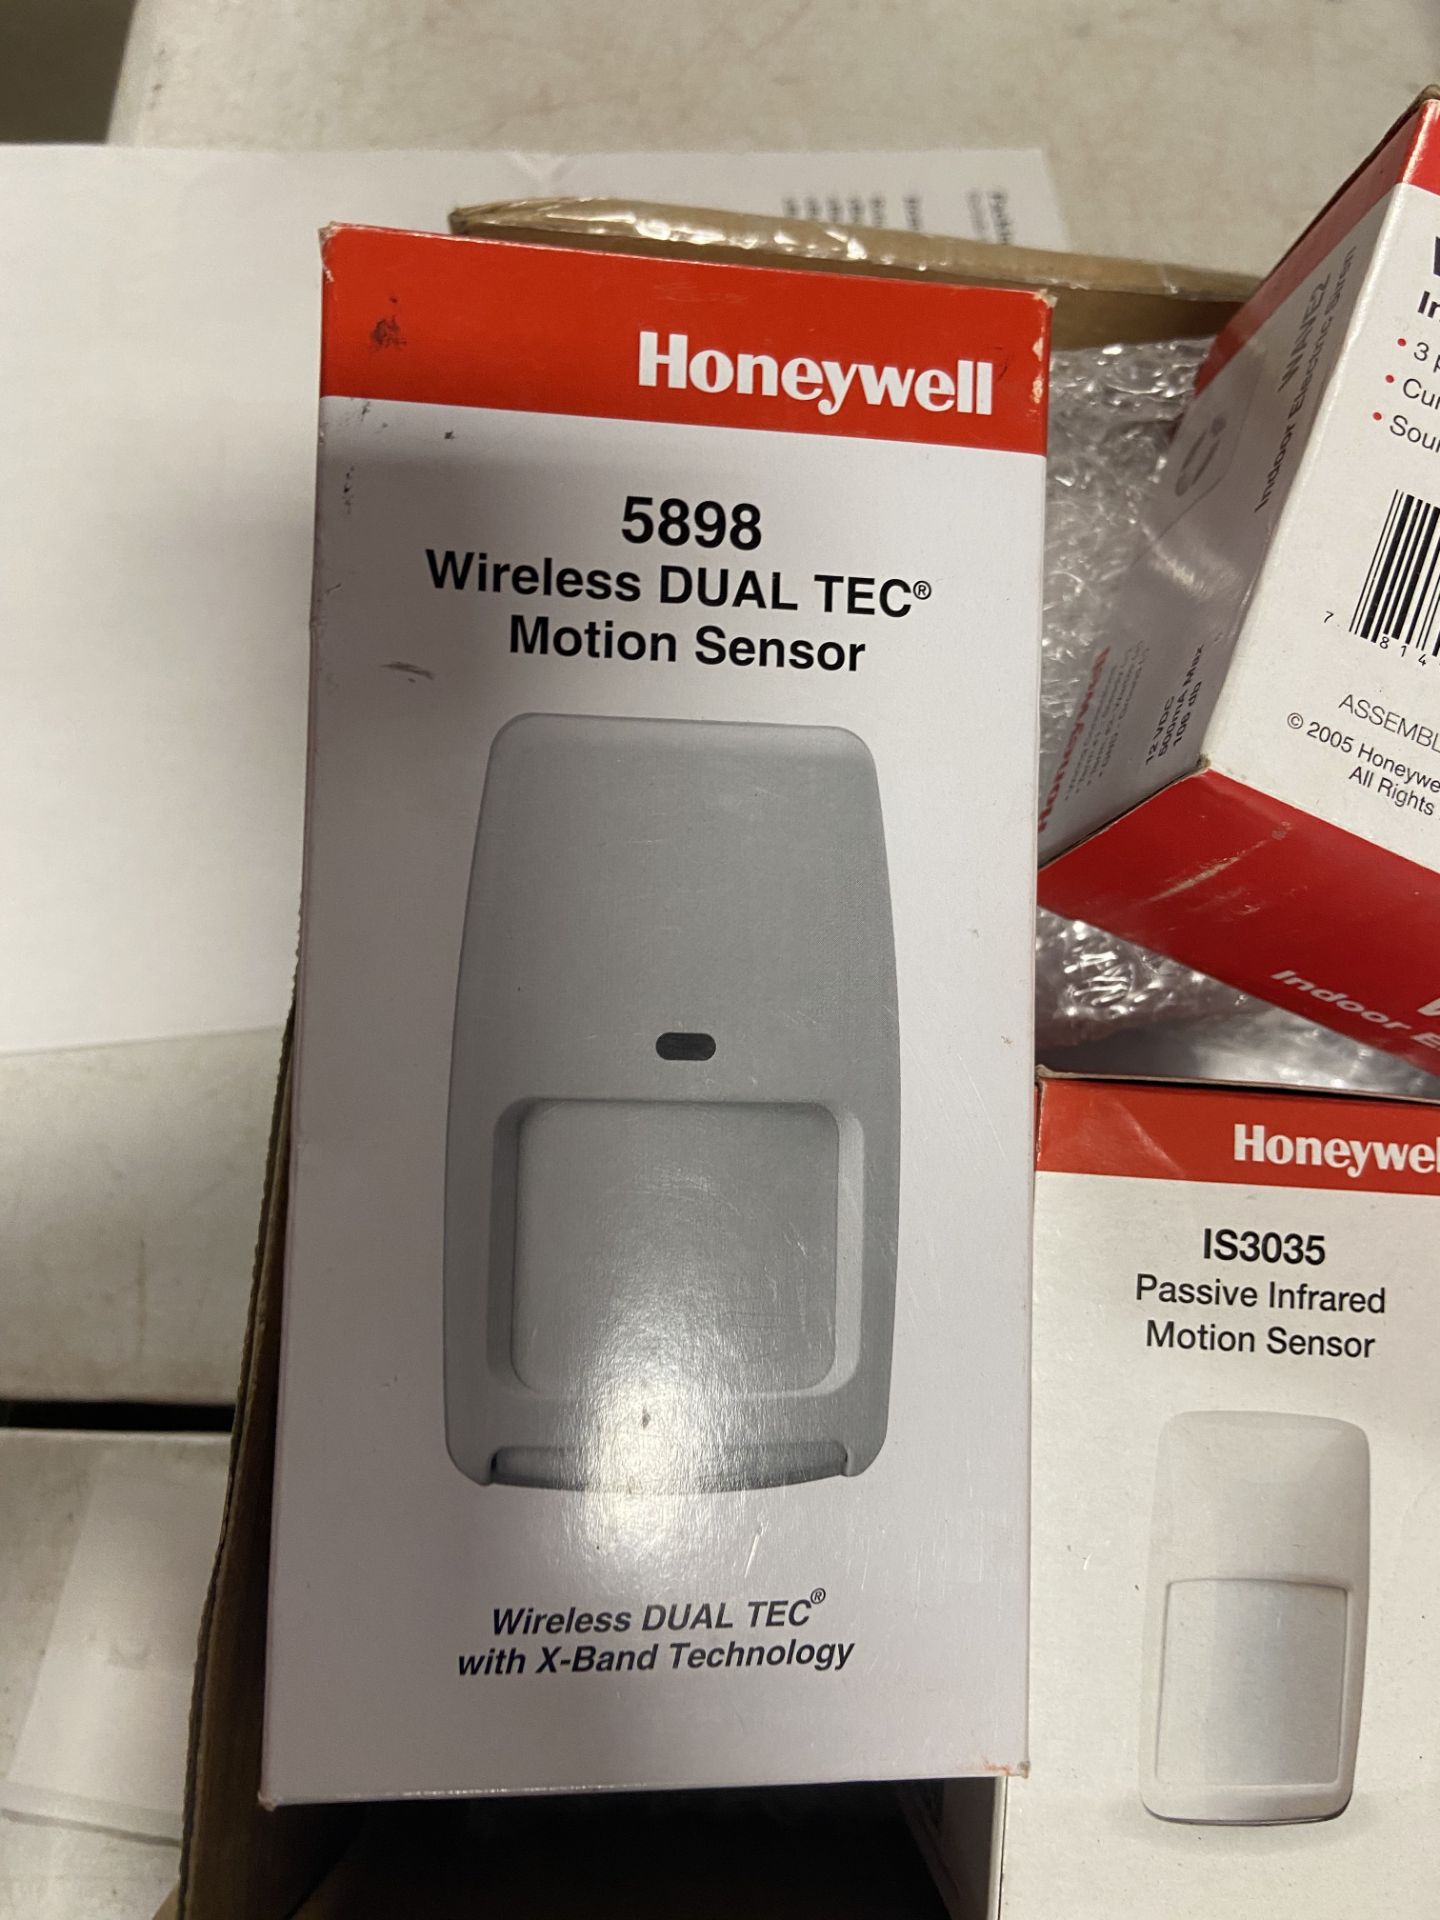 Miscellaneous Honeywell Security Products and Ethernet Surge Protectors (All Pictured), Rigging Fee: - Image 2 of 8